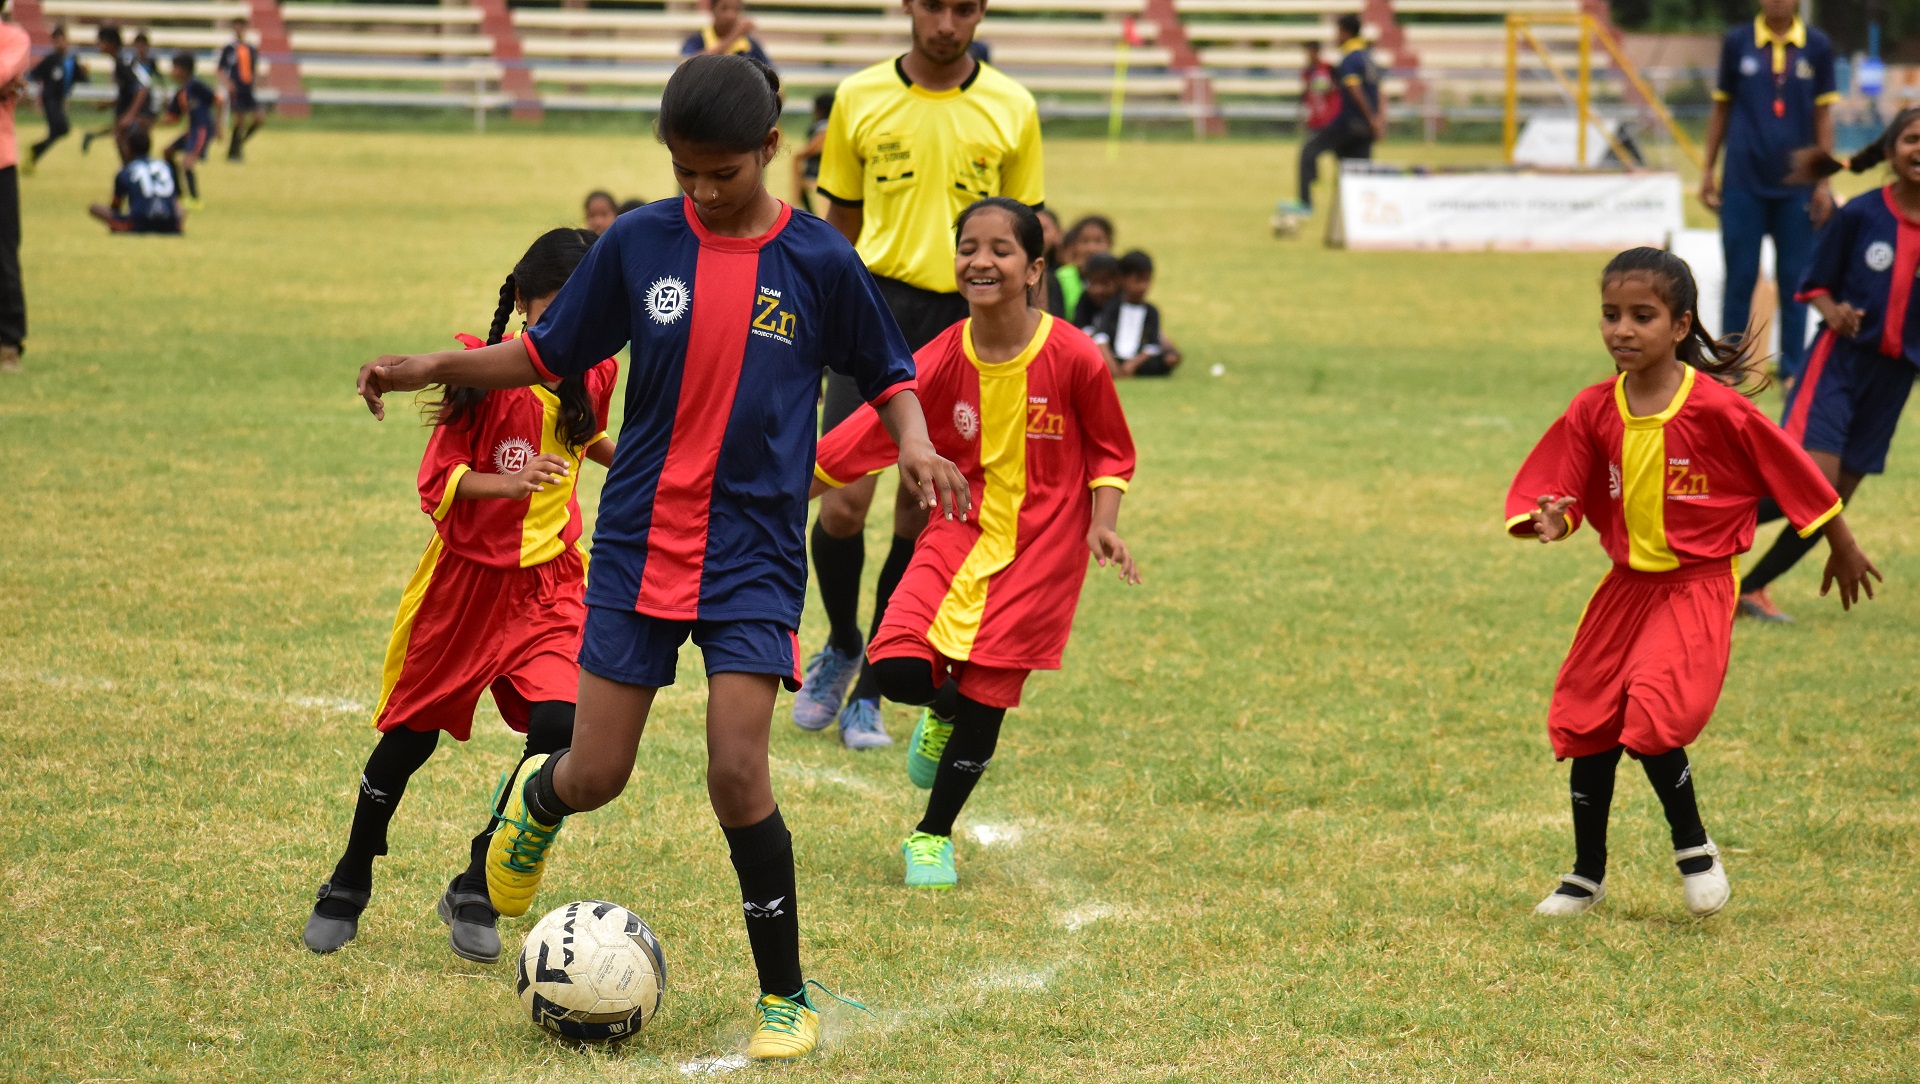 Girls come out in large numbers in Zinc Football